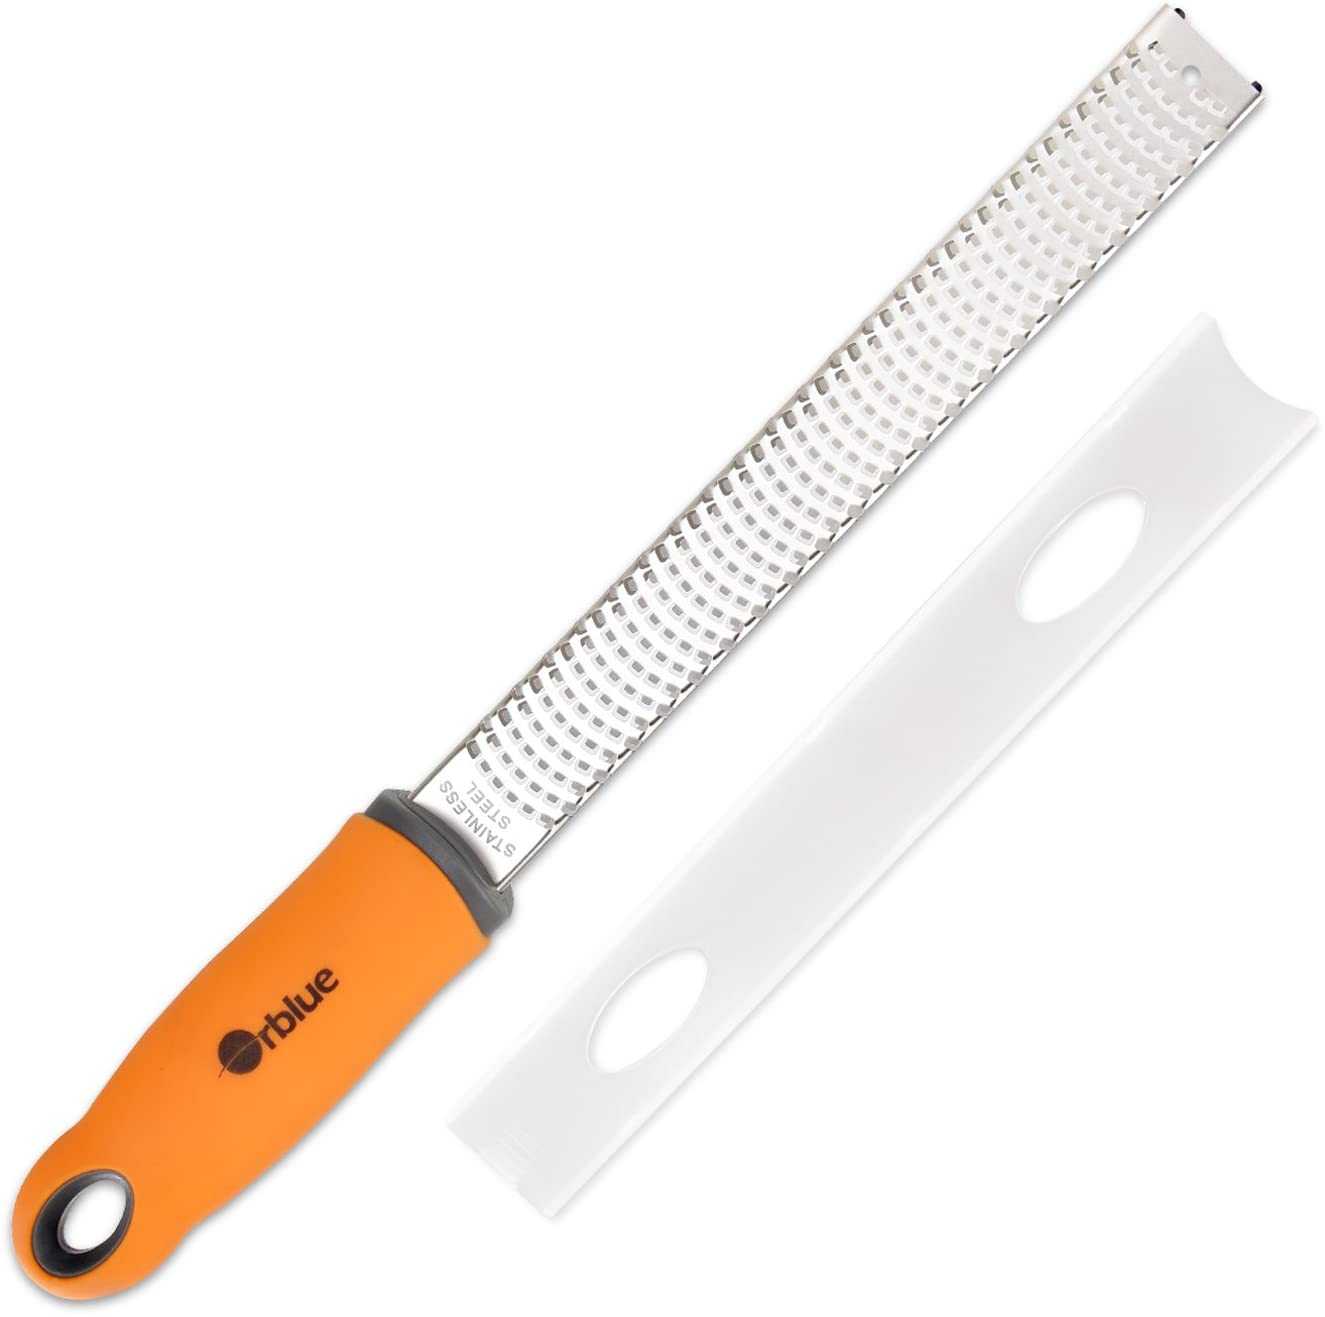 Microplane grater/Zester